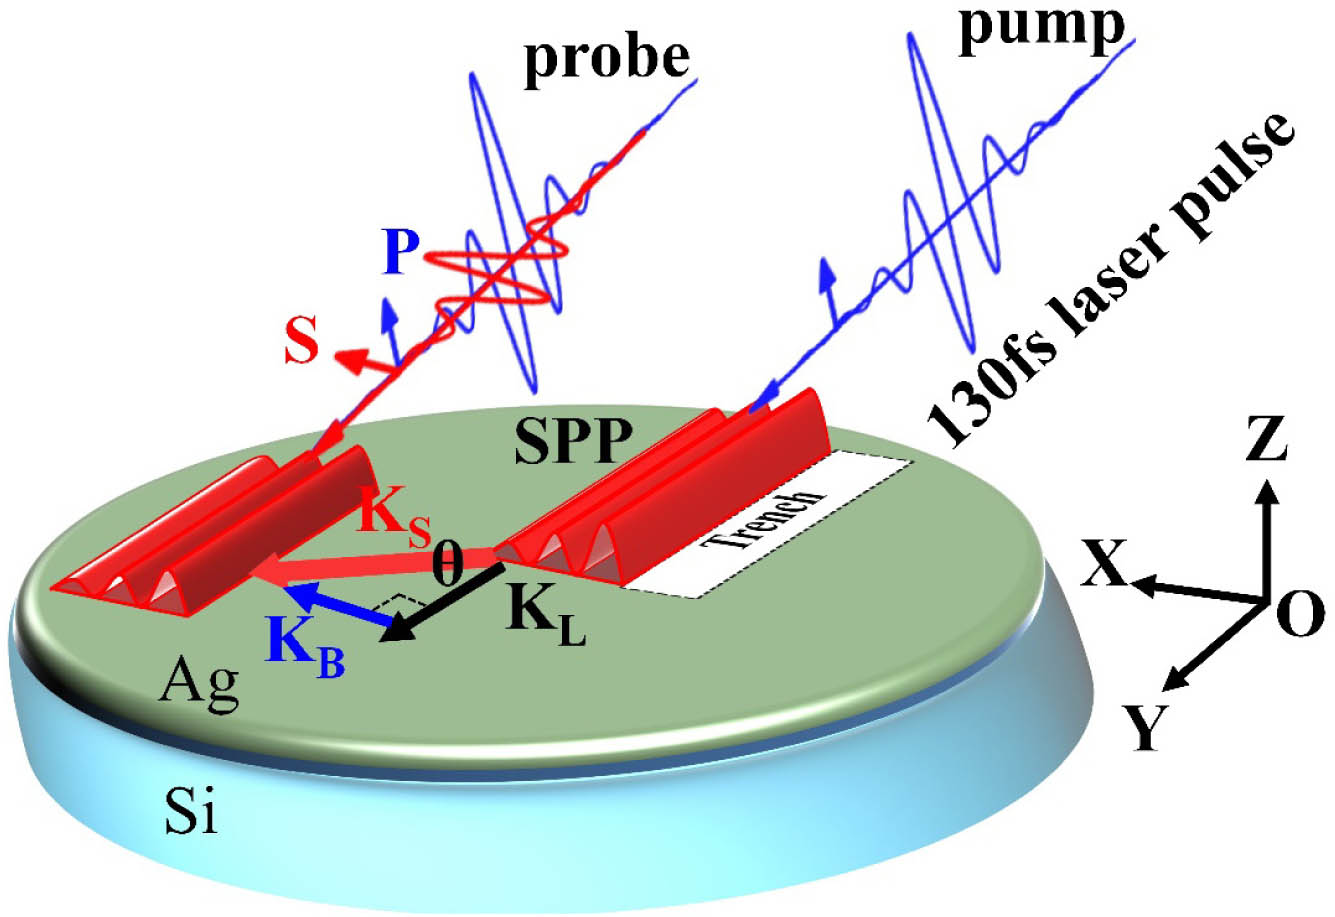 Schematic illustrations of the spatially separated pump-probe experiment of the noncollinear mode. In the pump-probe schemes, the probe is spatially and temporally offset from the pump, affording time-resolved imaging of the SPP launched away from the coupling trench structure.